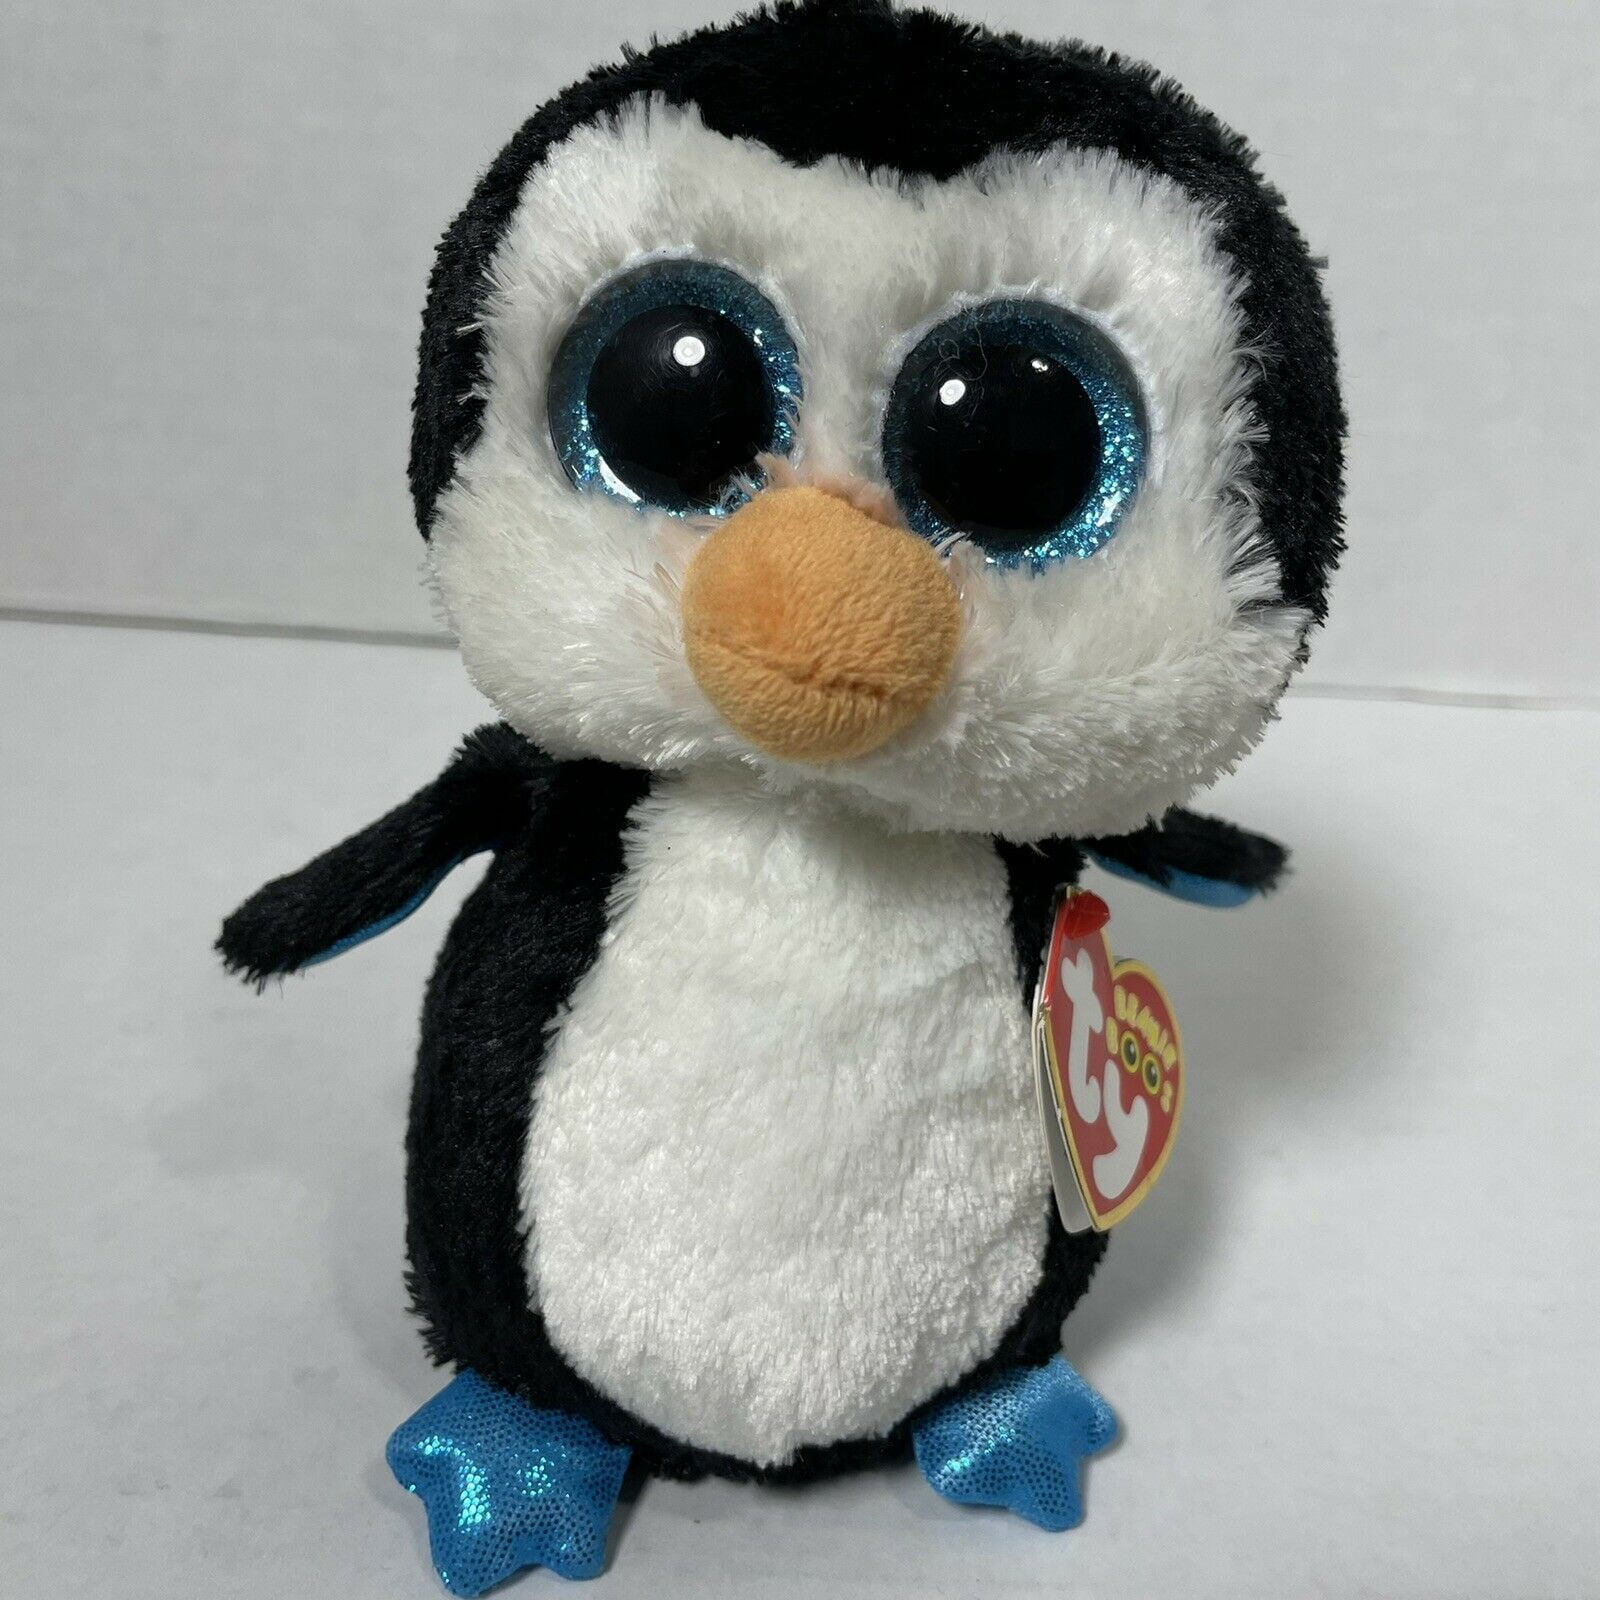 Details about   TY Beanie Buddy 2013 Waddles the Penguin 36008-D